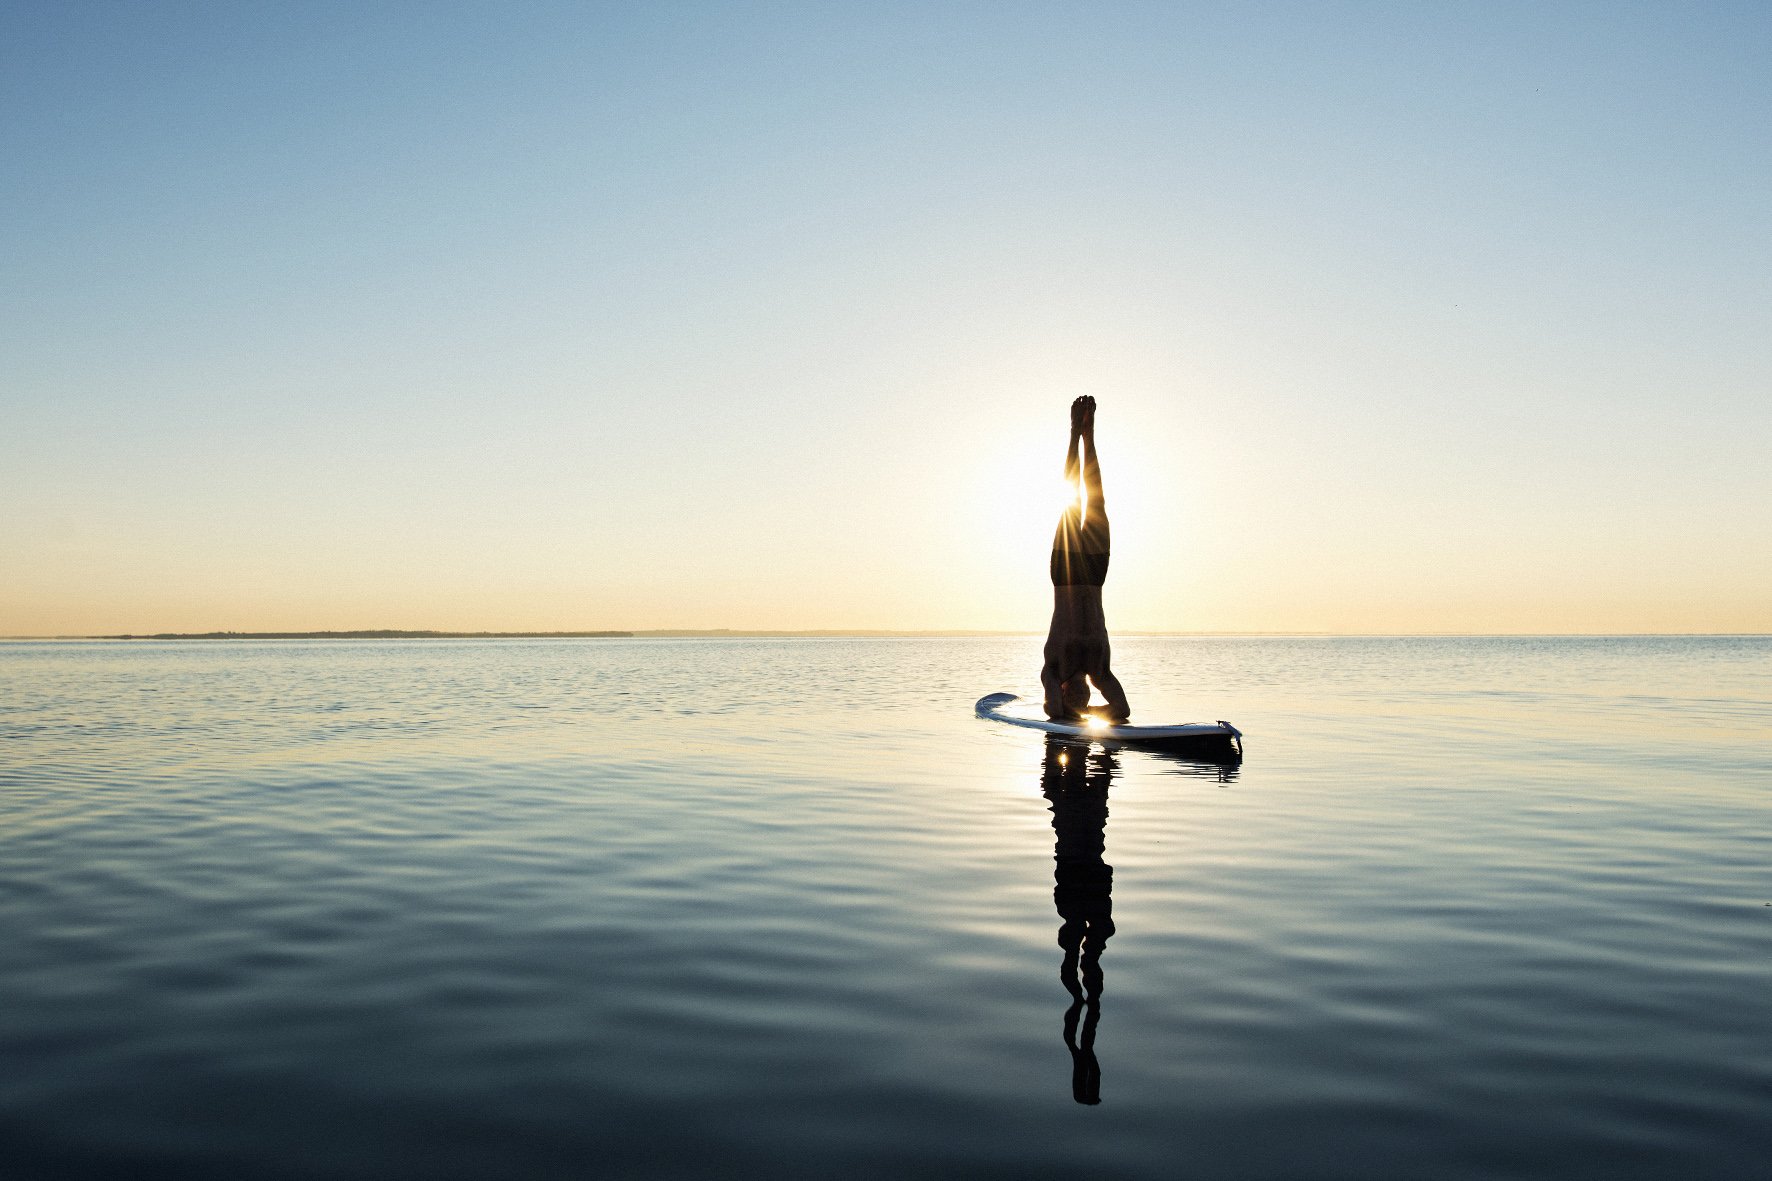 Man doing headstand on a sup board, silhouetted in the sunrise in calm waters.jpg